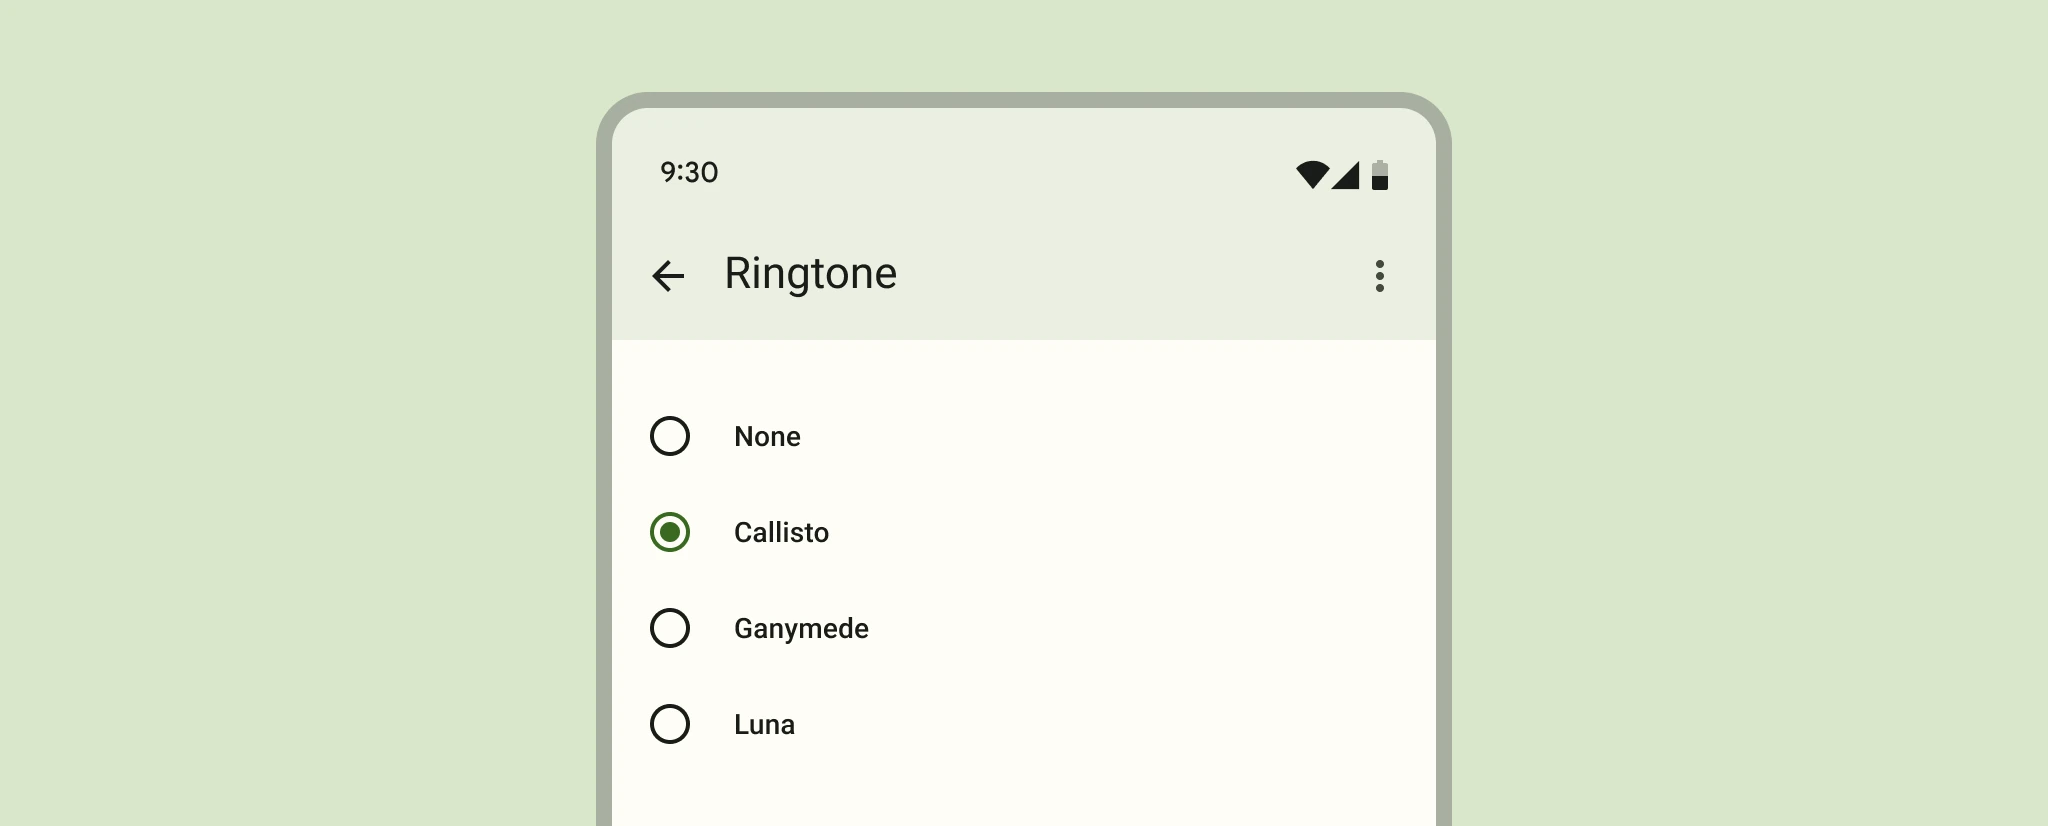 A list of items with radio buttons and one selected.